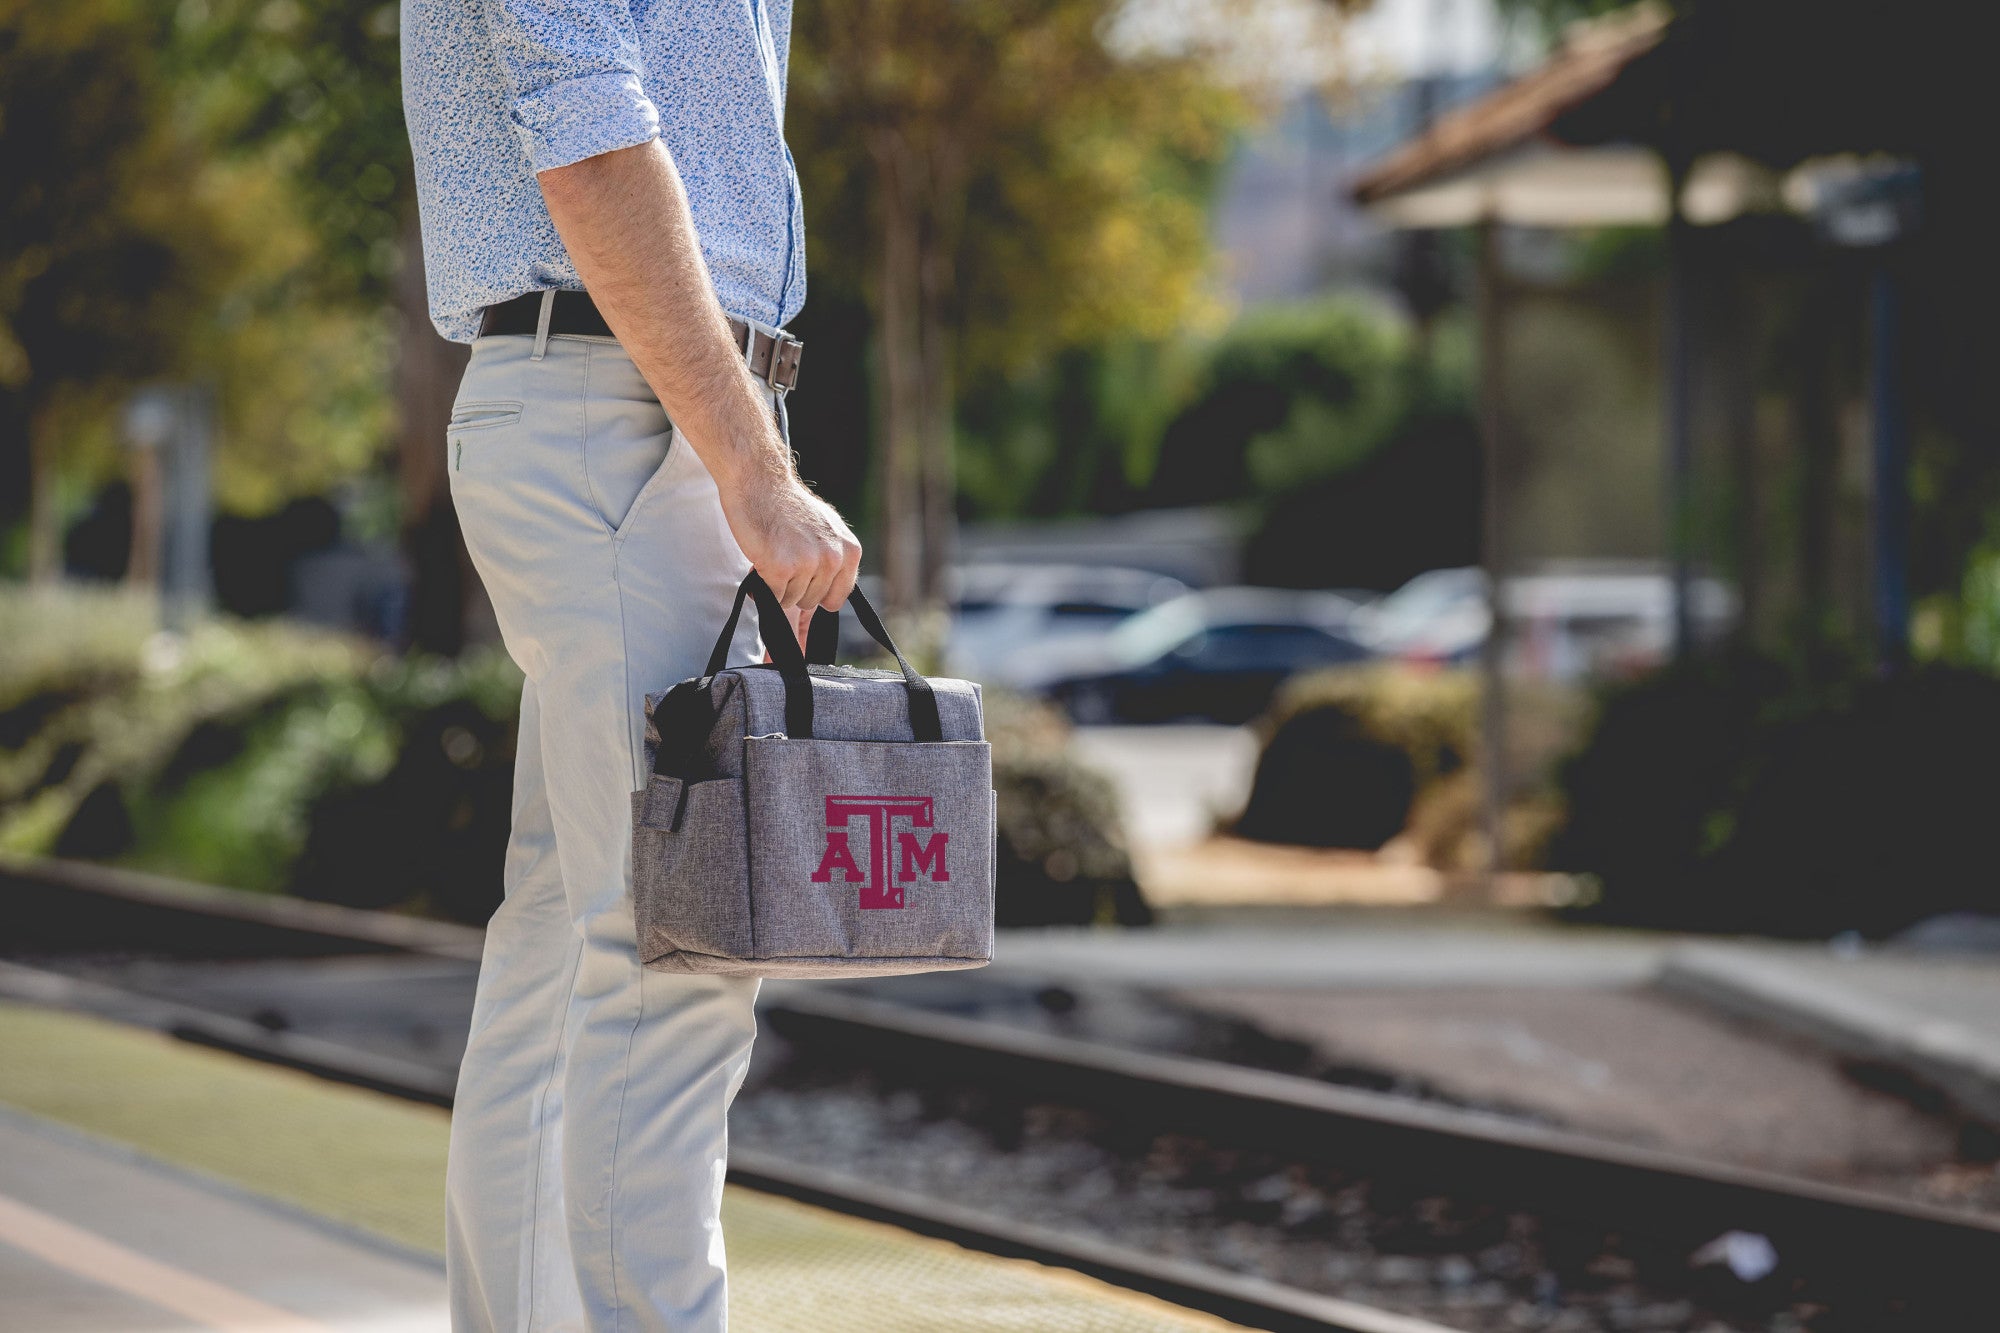 Texas A&M Aggies - On The Go Lunch Bag Cooler